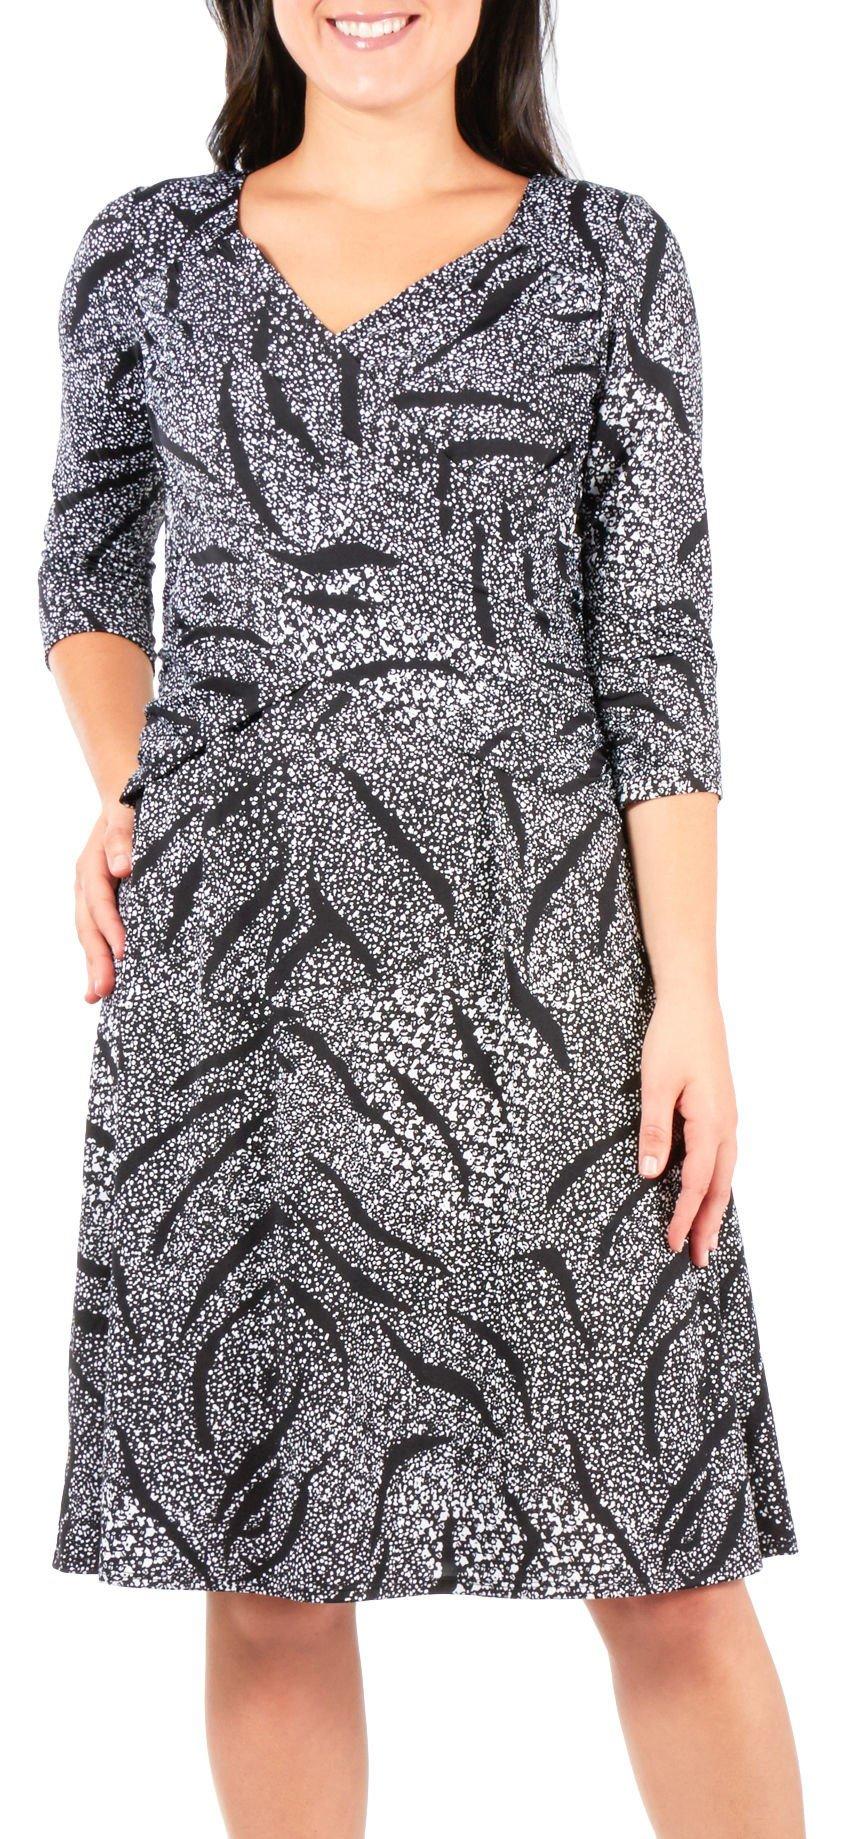 NY Collection Womens Printed Ruched Dress